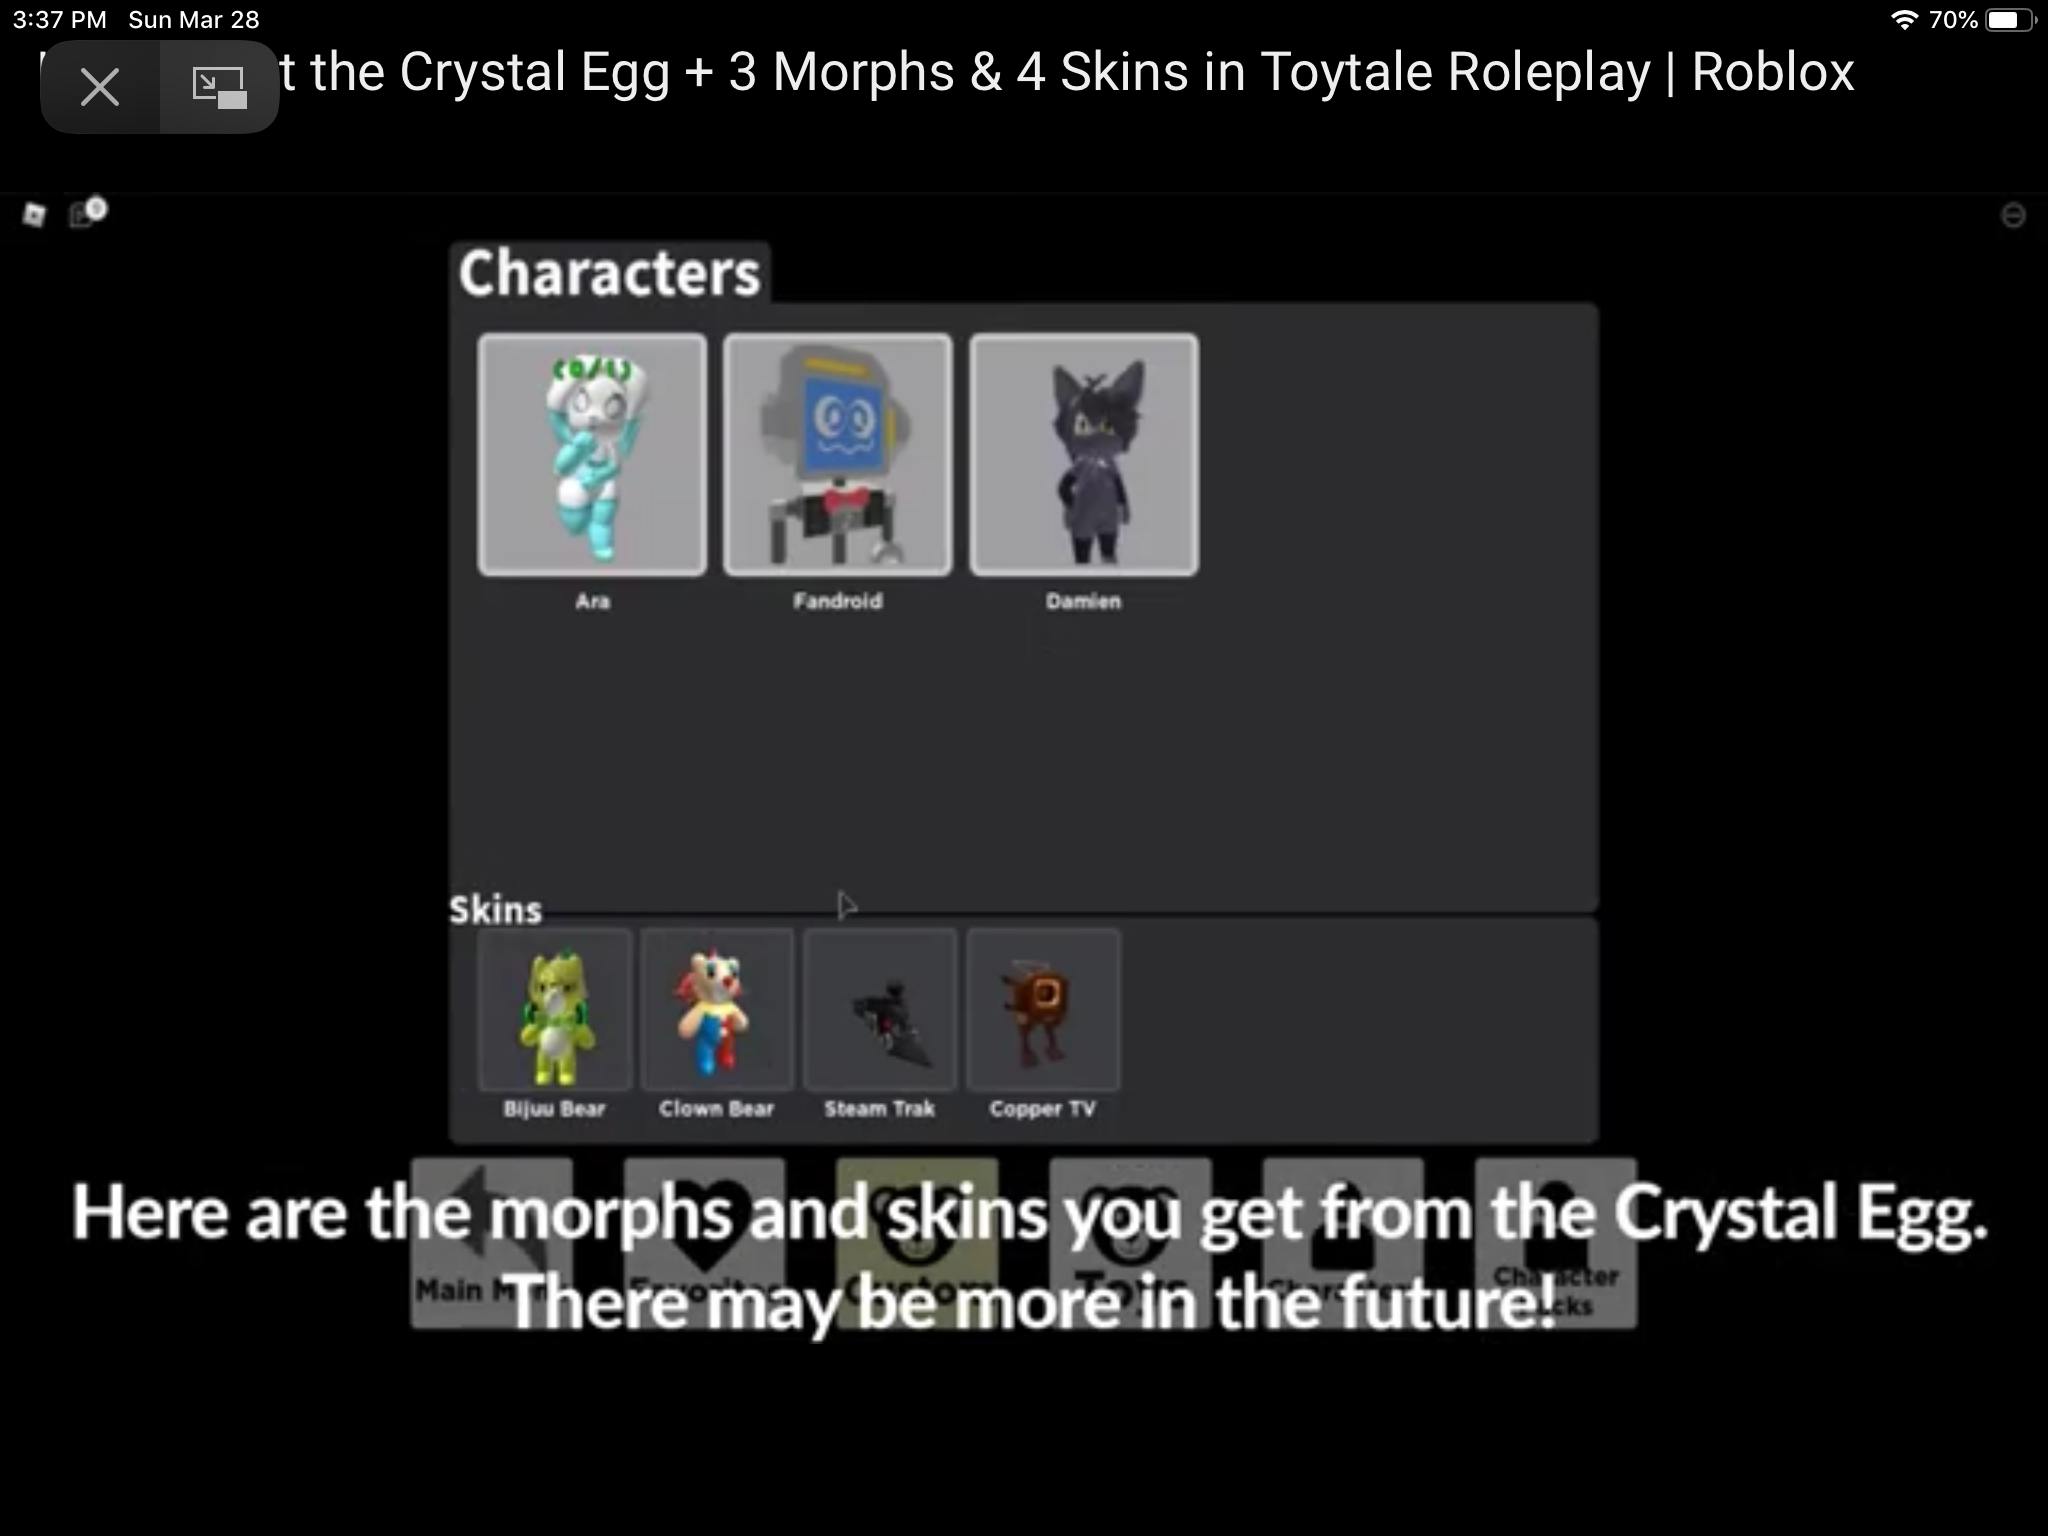 Crystal Egg Tattletail Roblox Rp Wiki Fandom - roblox tattletail rp how to get glitchy egg